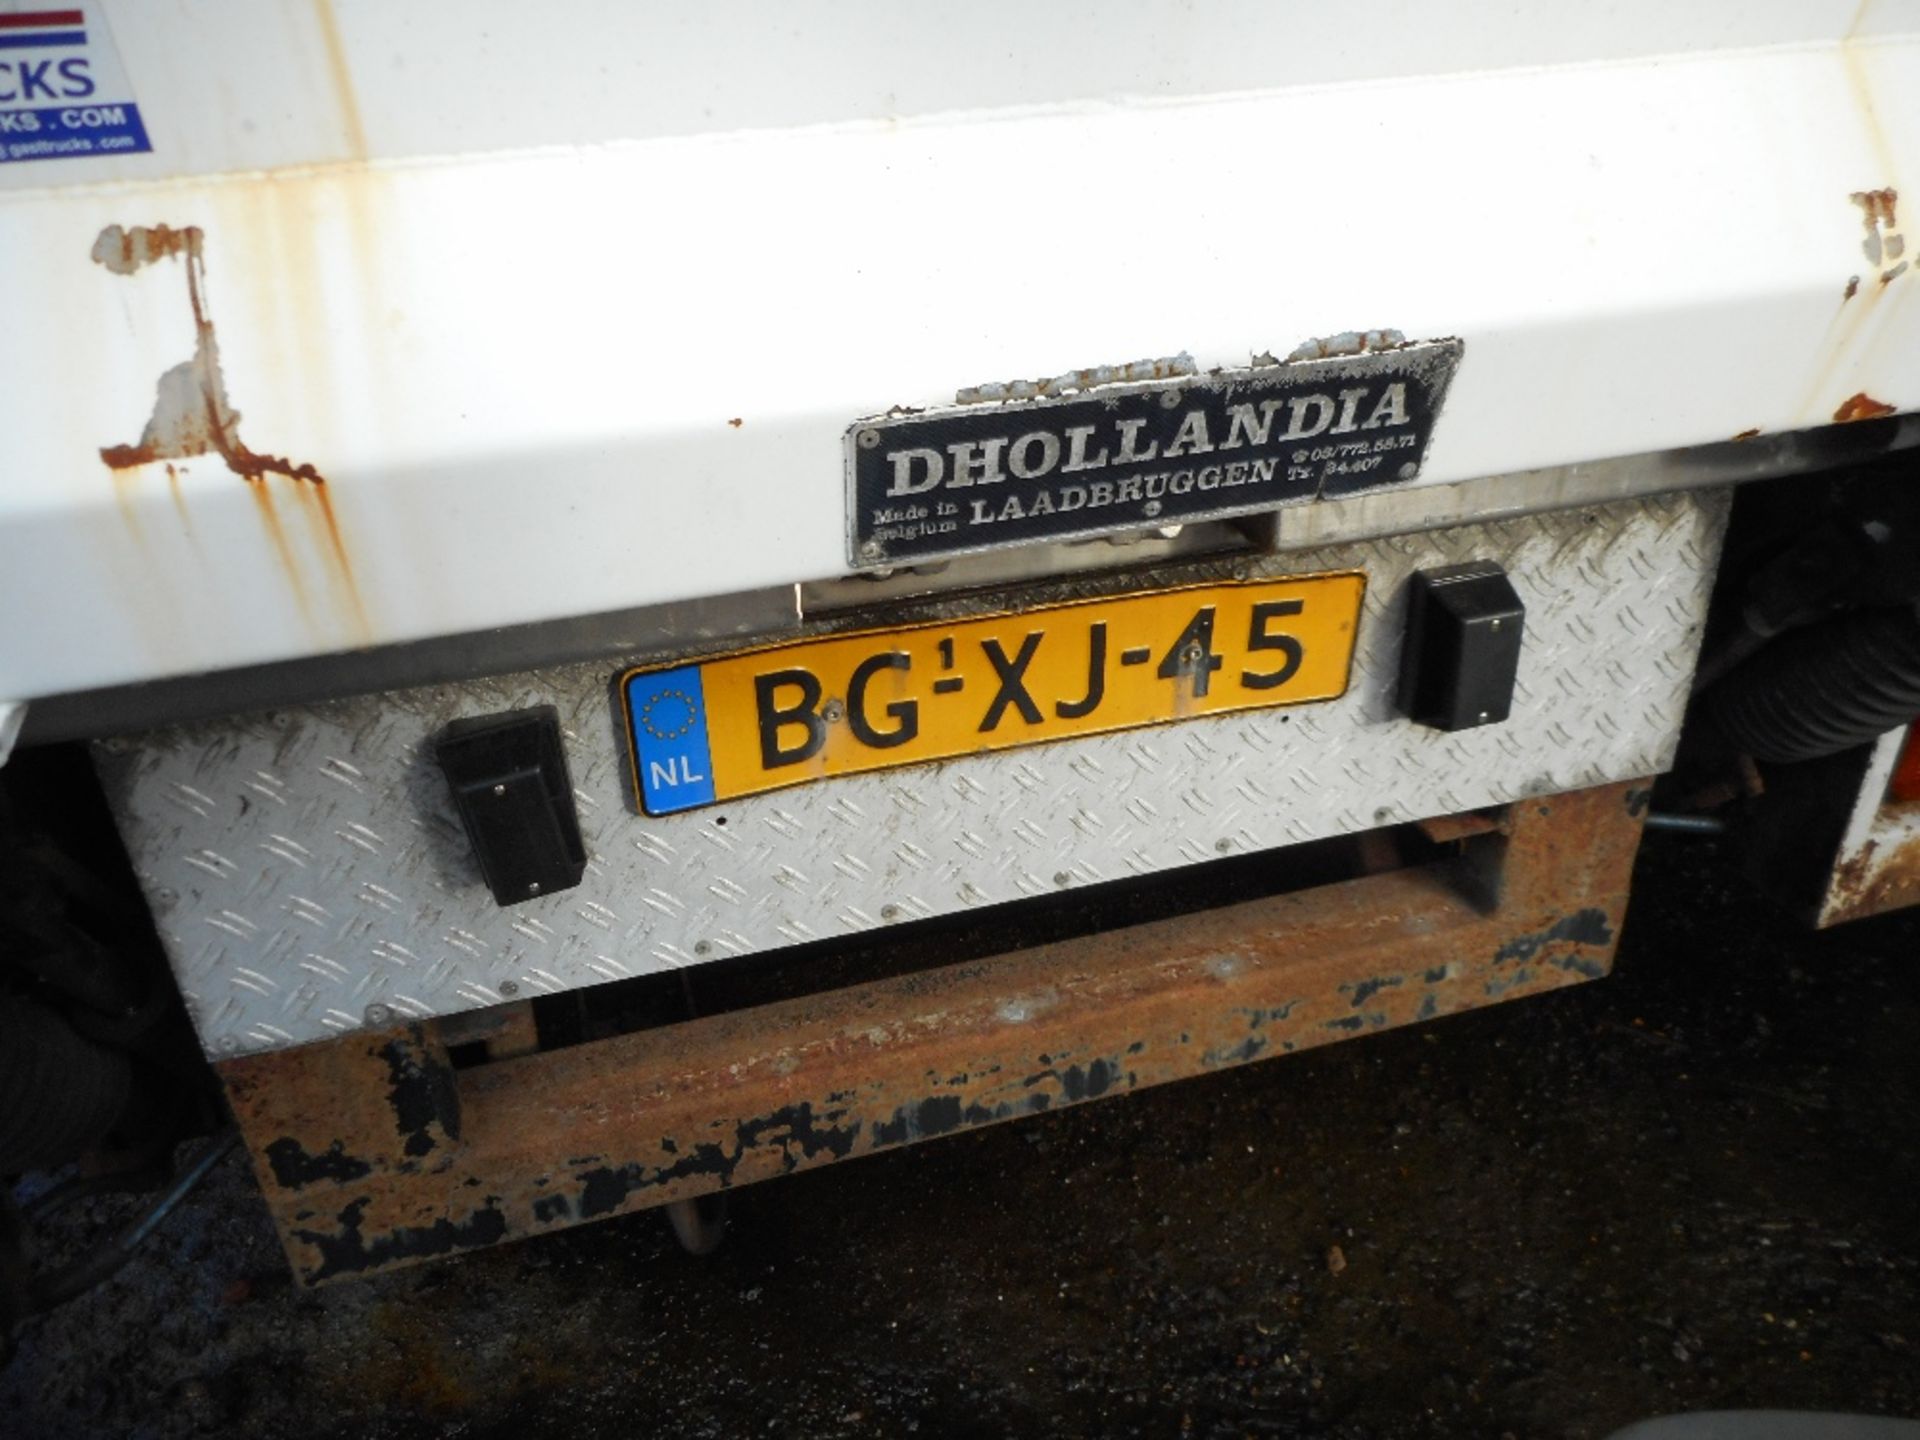 Ford Eurocargo LHD sleeper cabbed fridge lorry currently registered in Holland. - Image 7 of 14